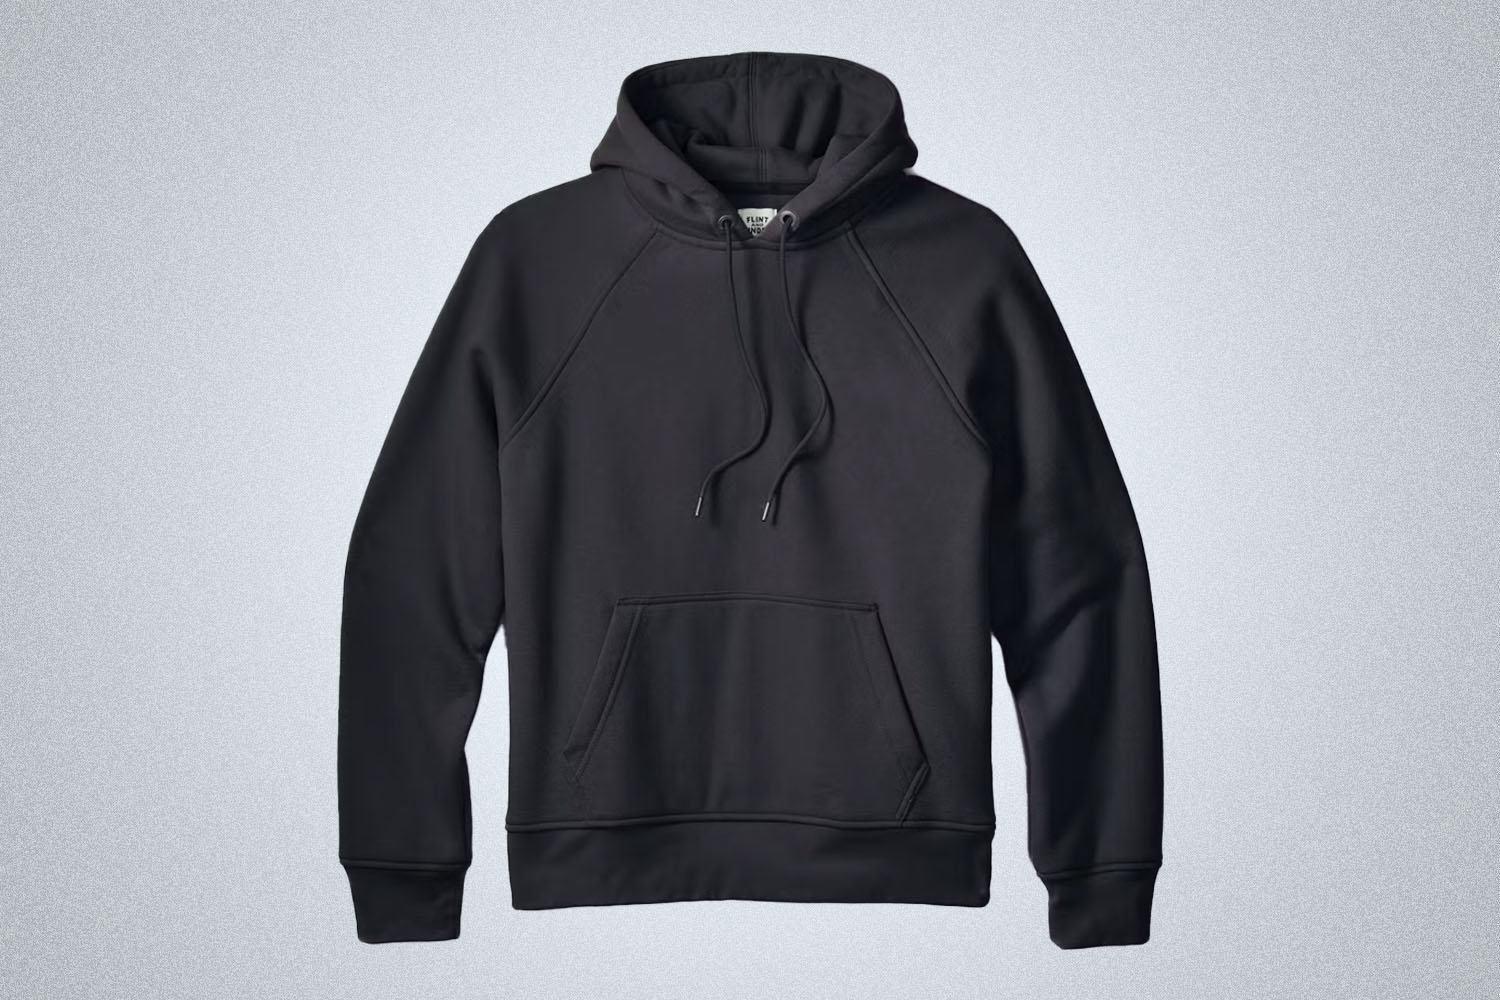 a hoodie on a grey background